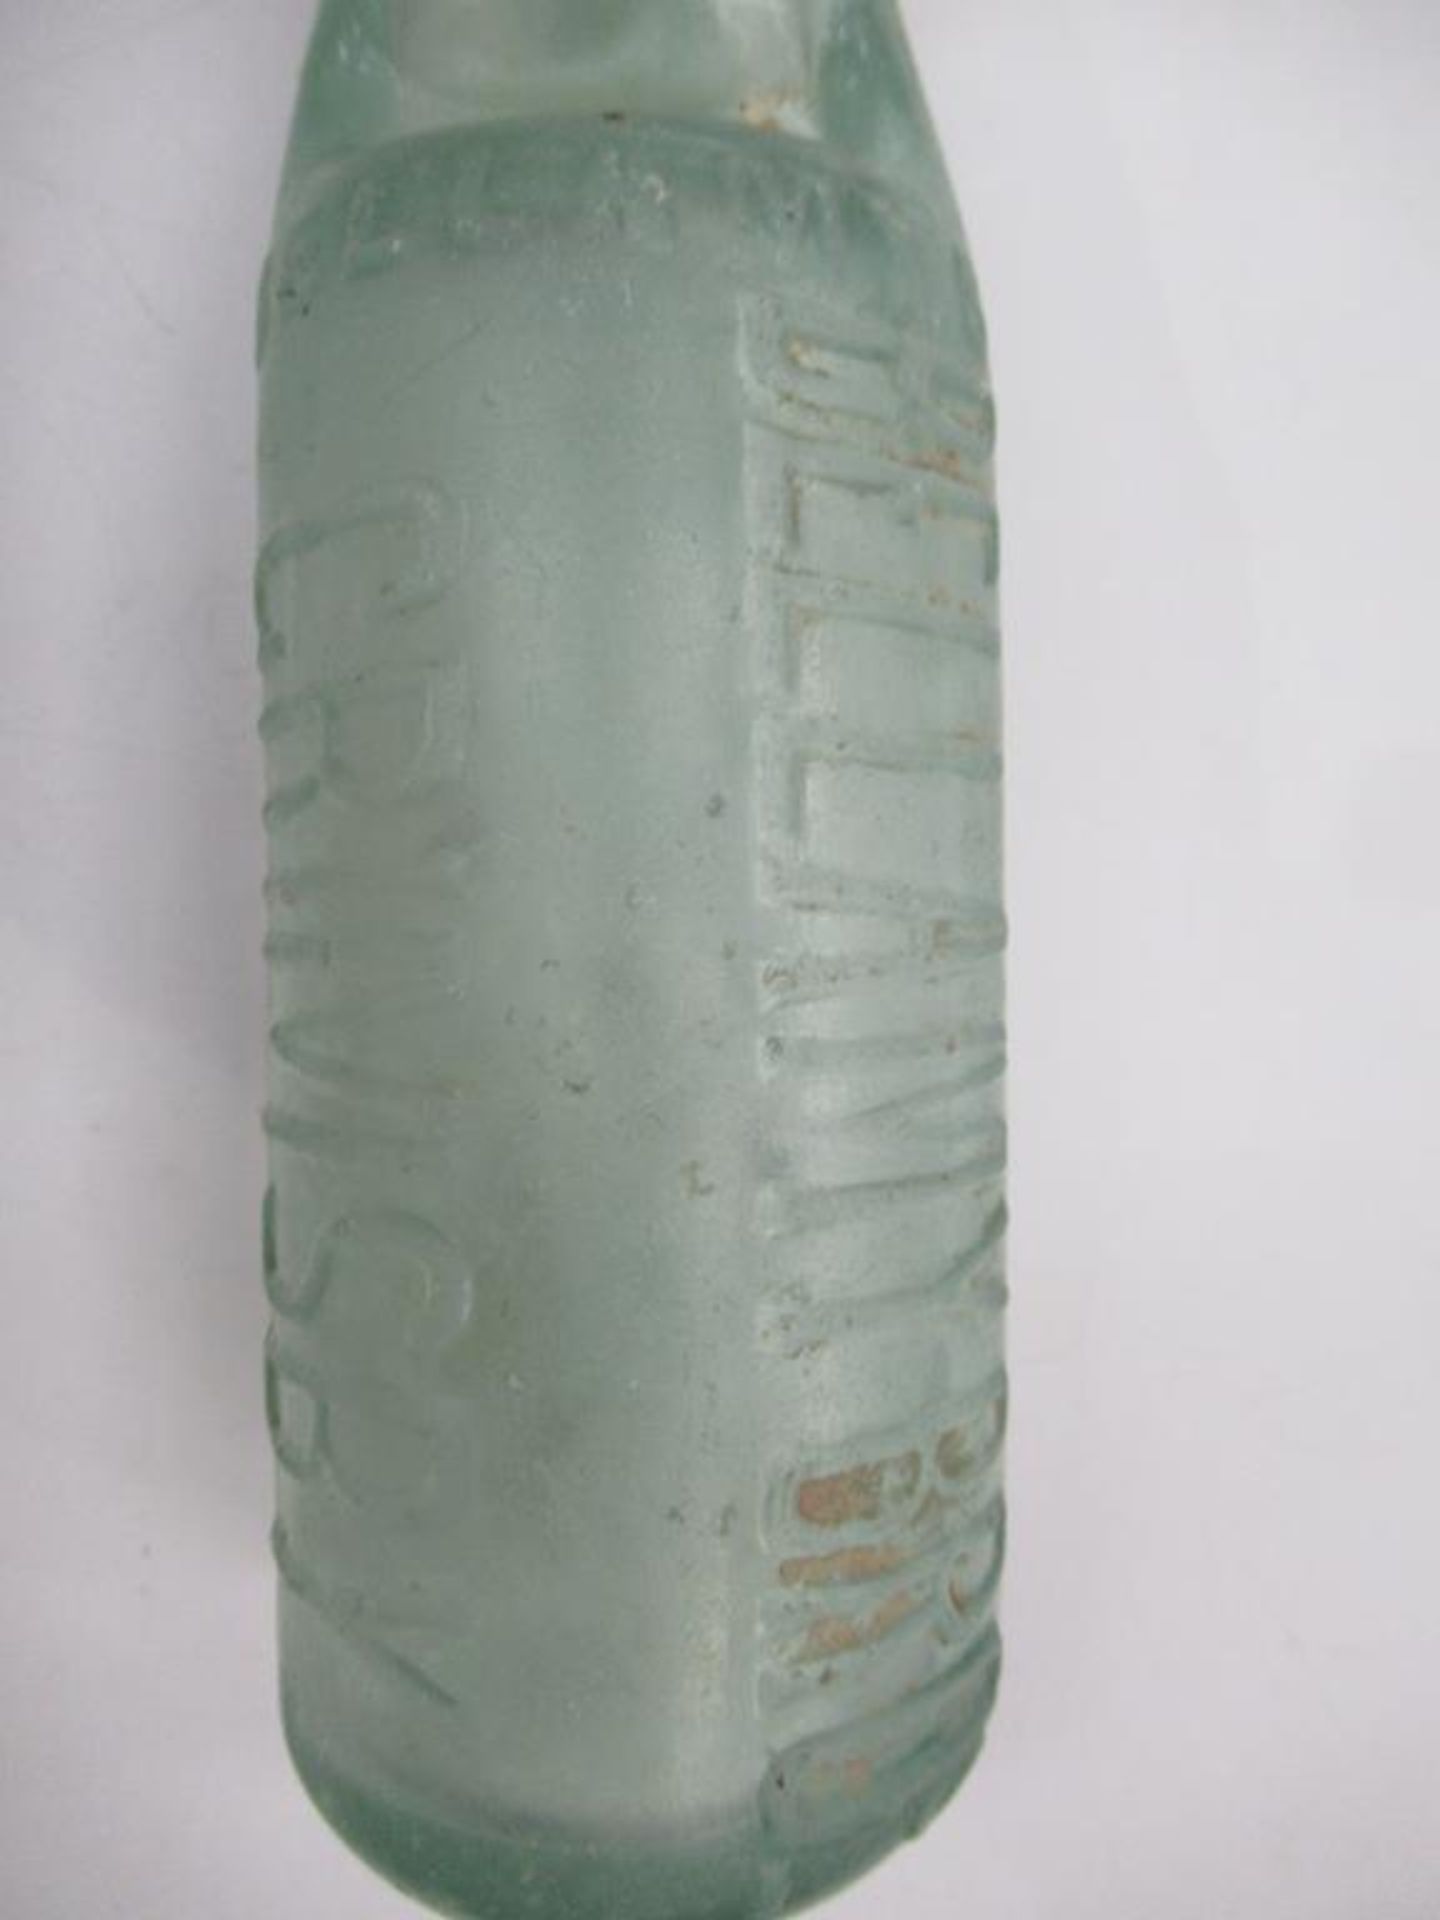 7x Grimsby (3x Grimsby & Louth) Bellamy Bro's Codd bottles - Image 9 of 23